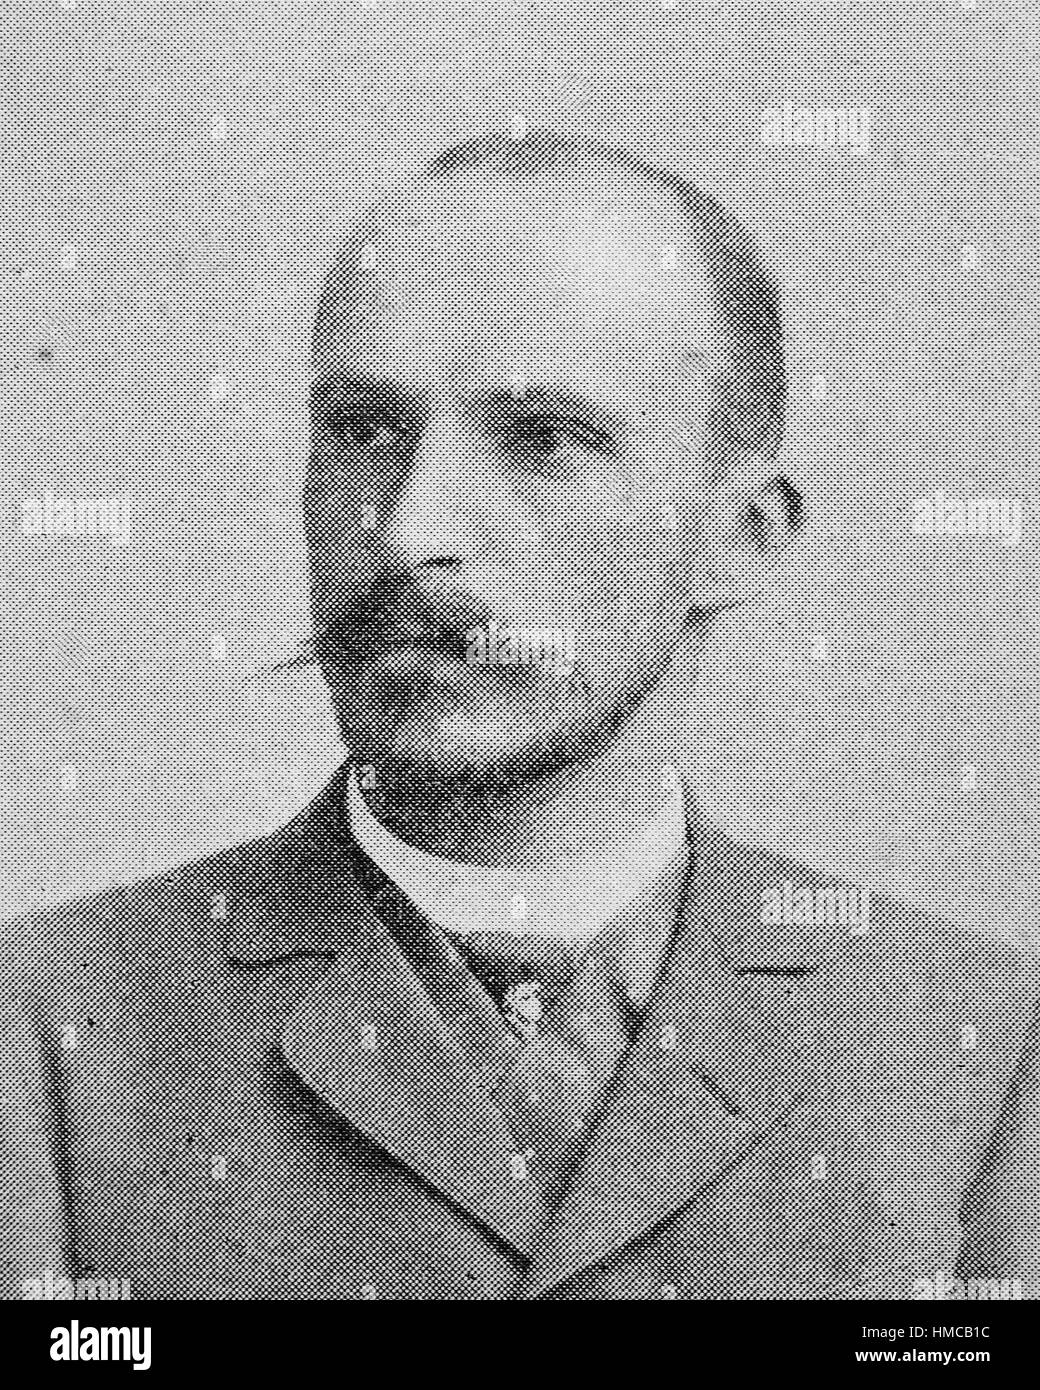 Wolfgang Golther, born May 25, 1863 in Stuttgart, Germany, December 14, 1945 in Rostock, was a Germanist and literary historian. He is regarded as co-founder of Wagner's philology, photo or illustration, published 1892, digital improved Stock Photo